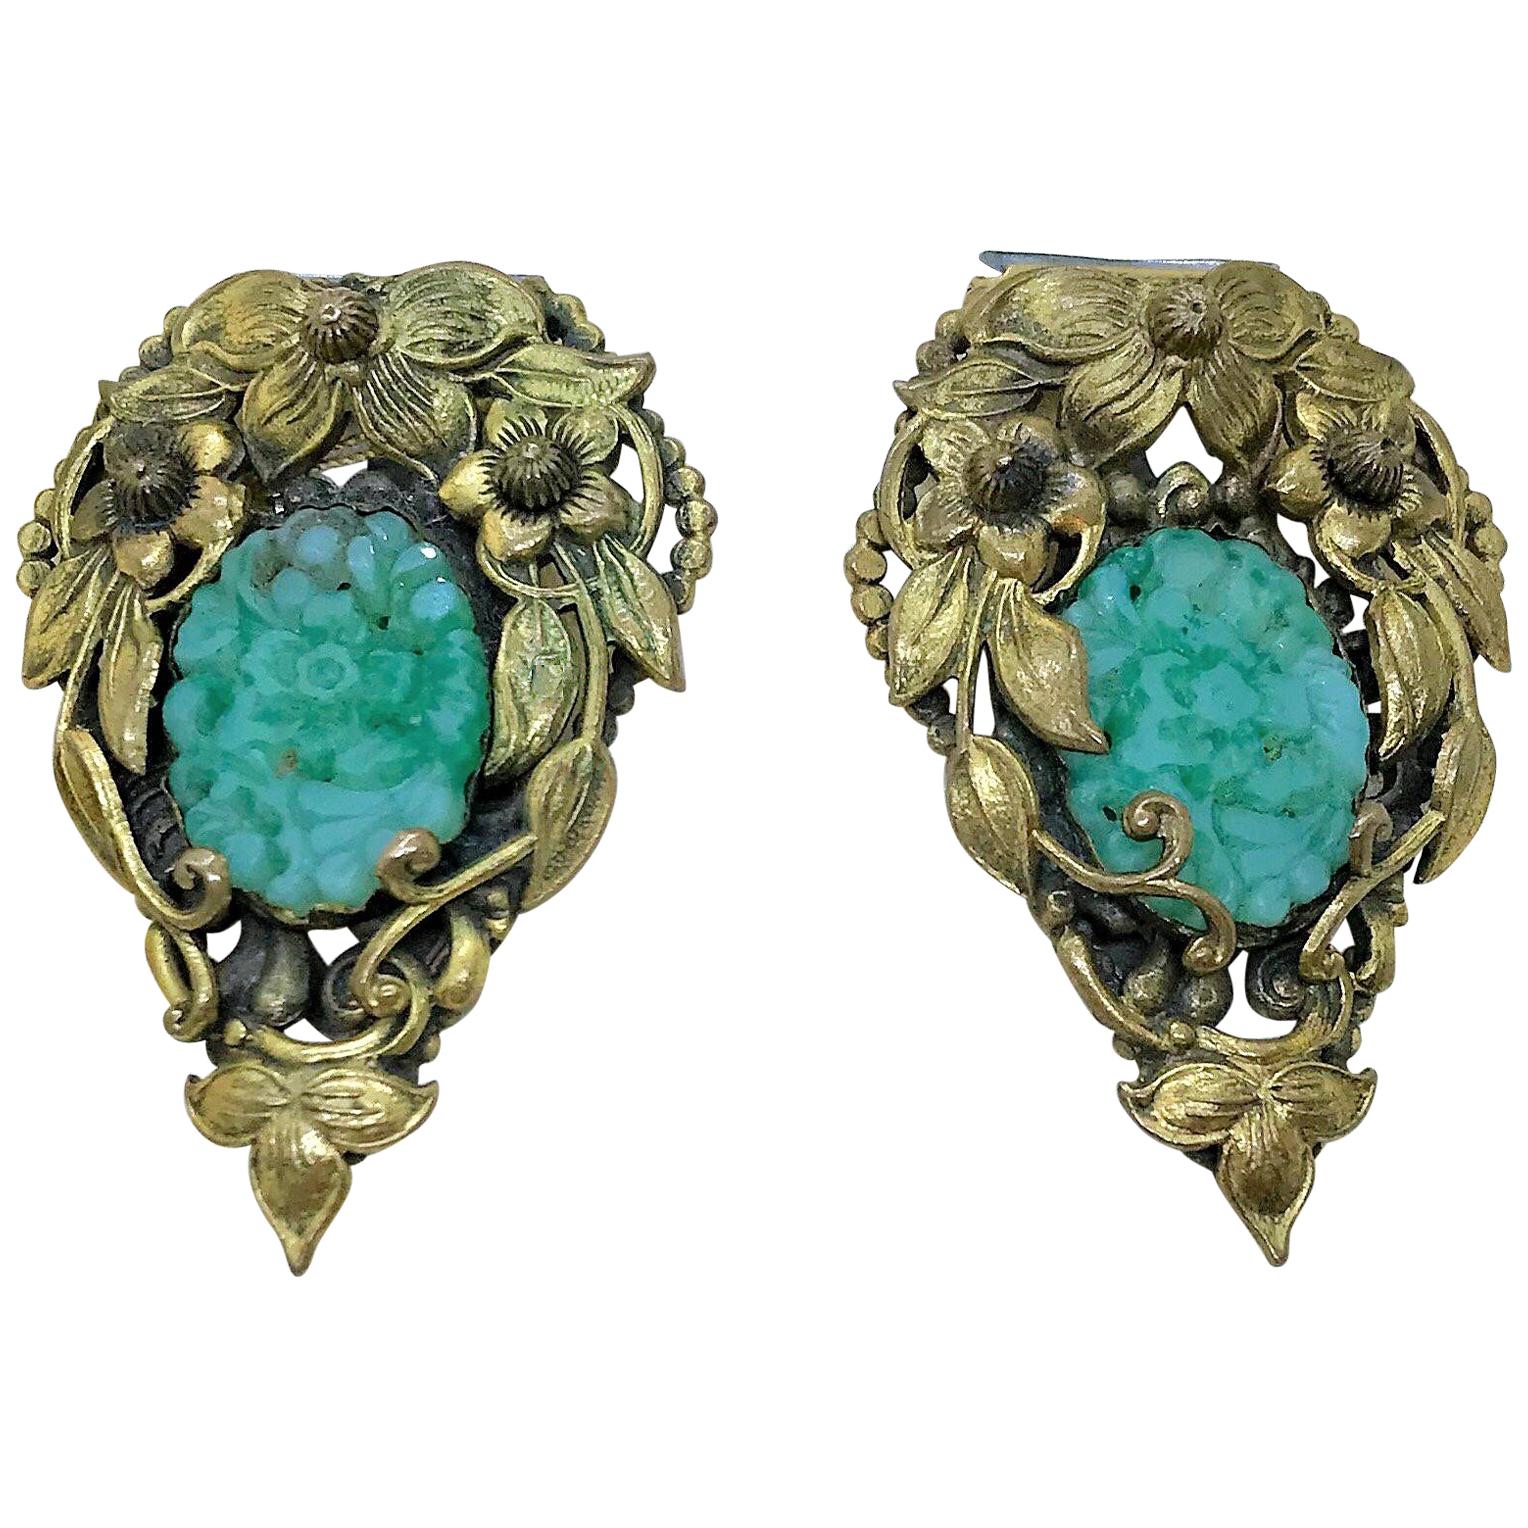 Circa 1930 Goldtone Floral Dress Clips Set With Molded Jade Green Glass, Pair For Sale